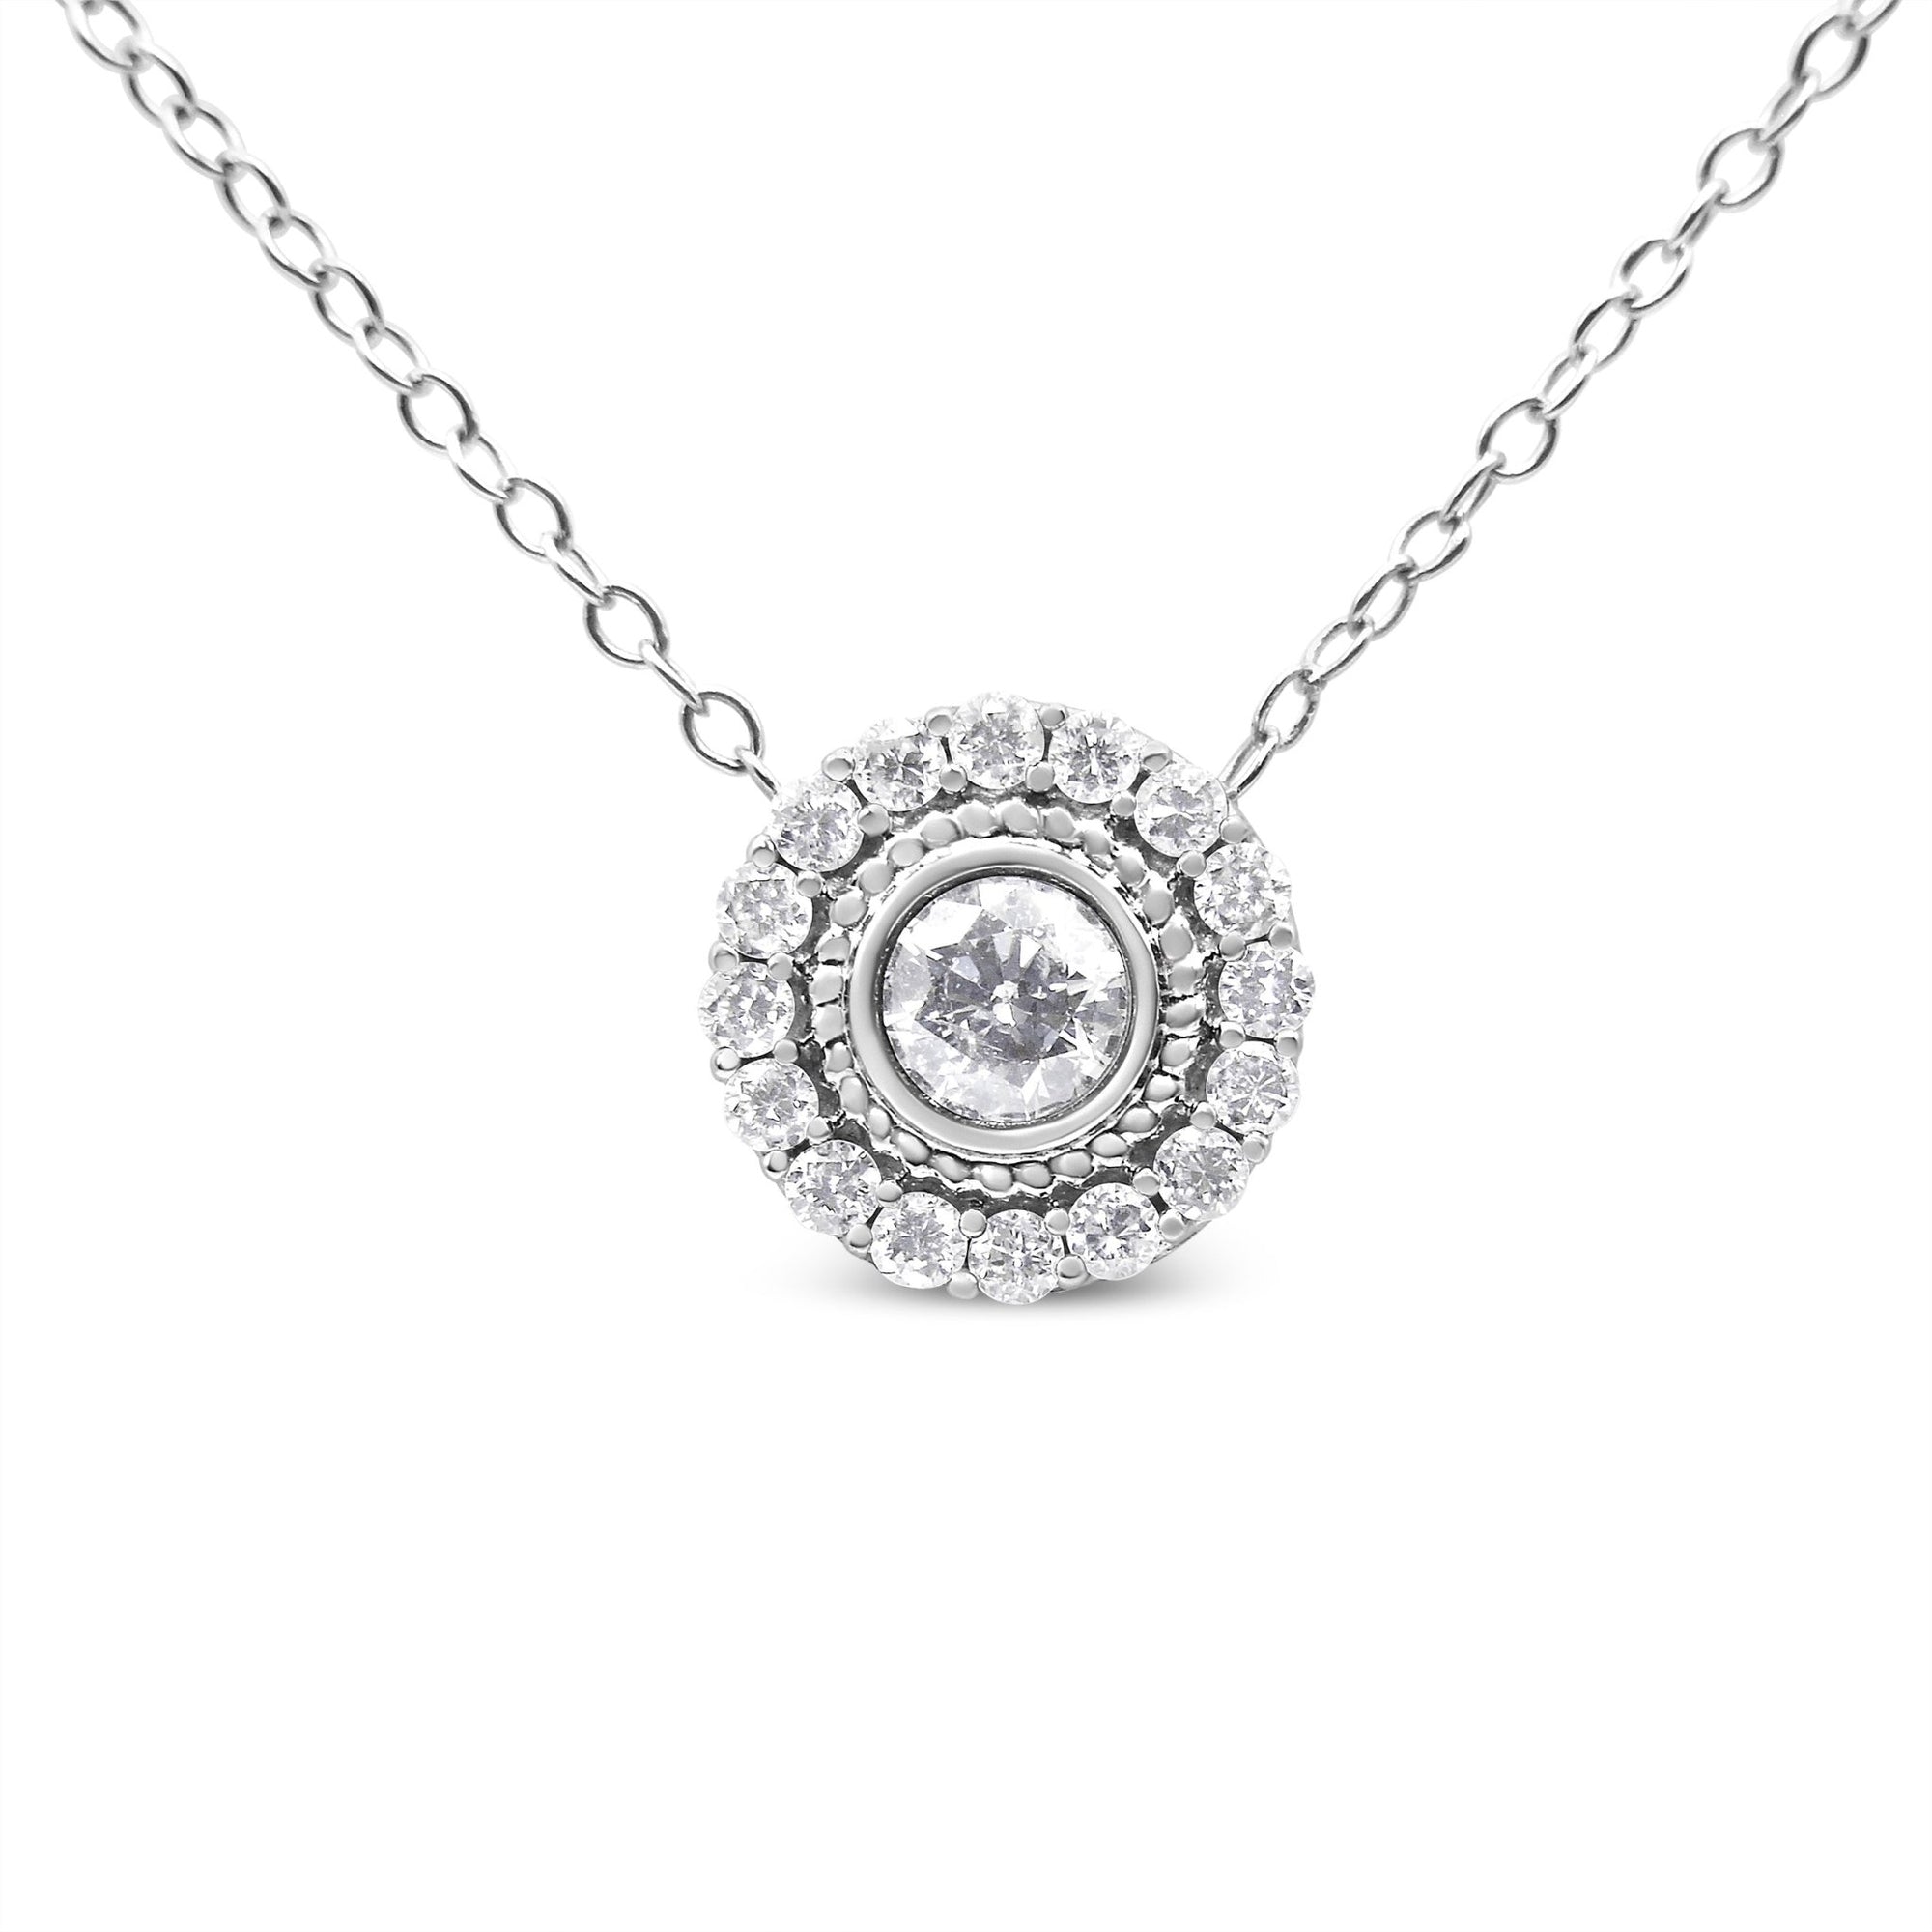 .925 Sterling Silver 1/2 Cttw Round Diamond Halo Circle Pendant 18" Necklace (I-J Color, I2-I3 Clarity) - LinkagejewelrydesignLinkagejewelrydesign